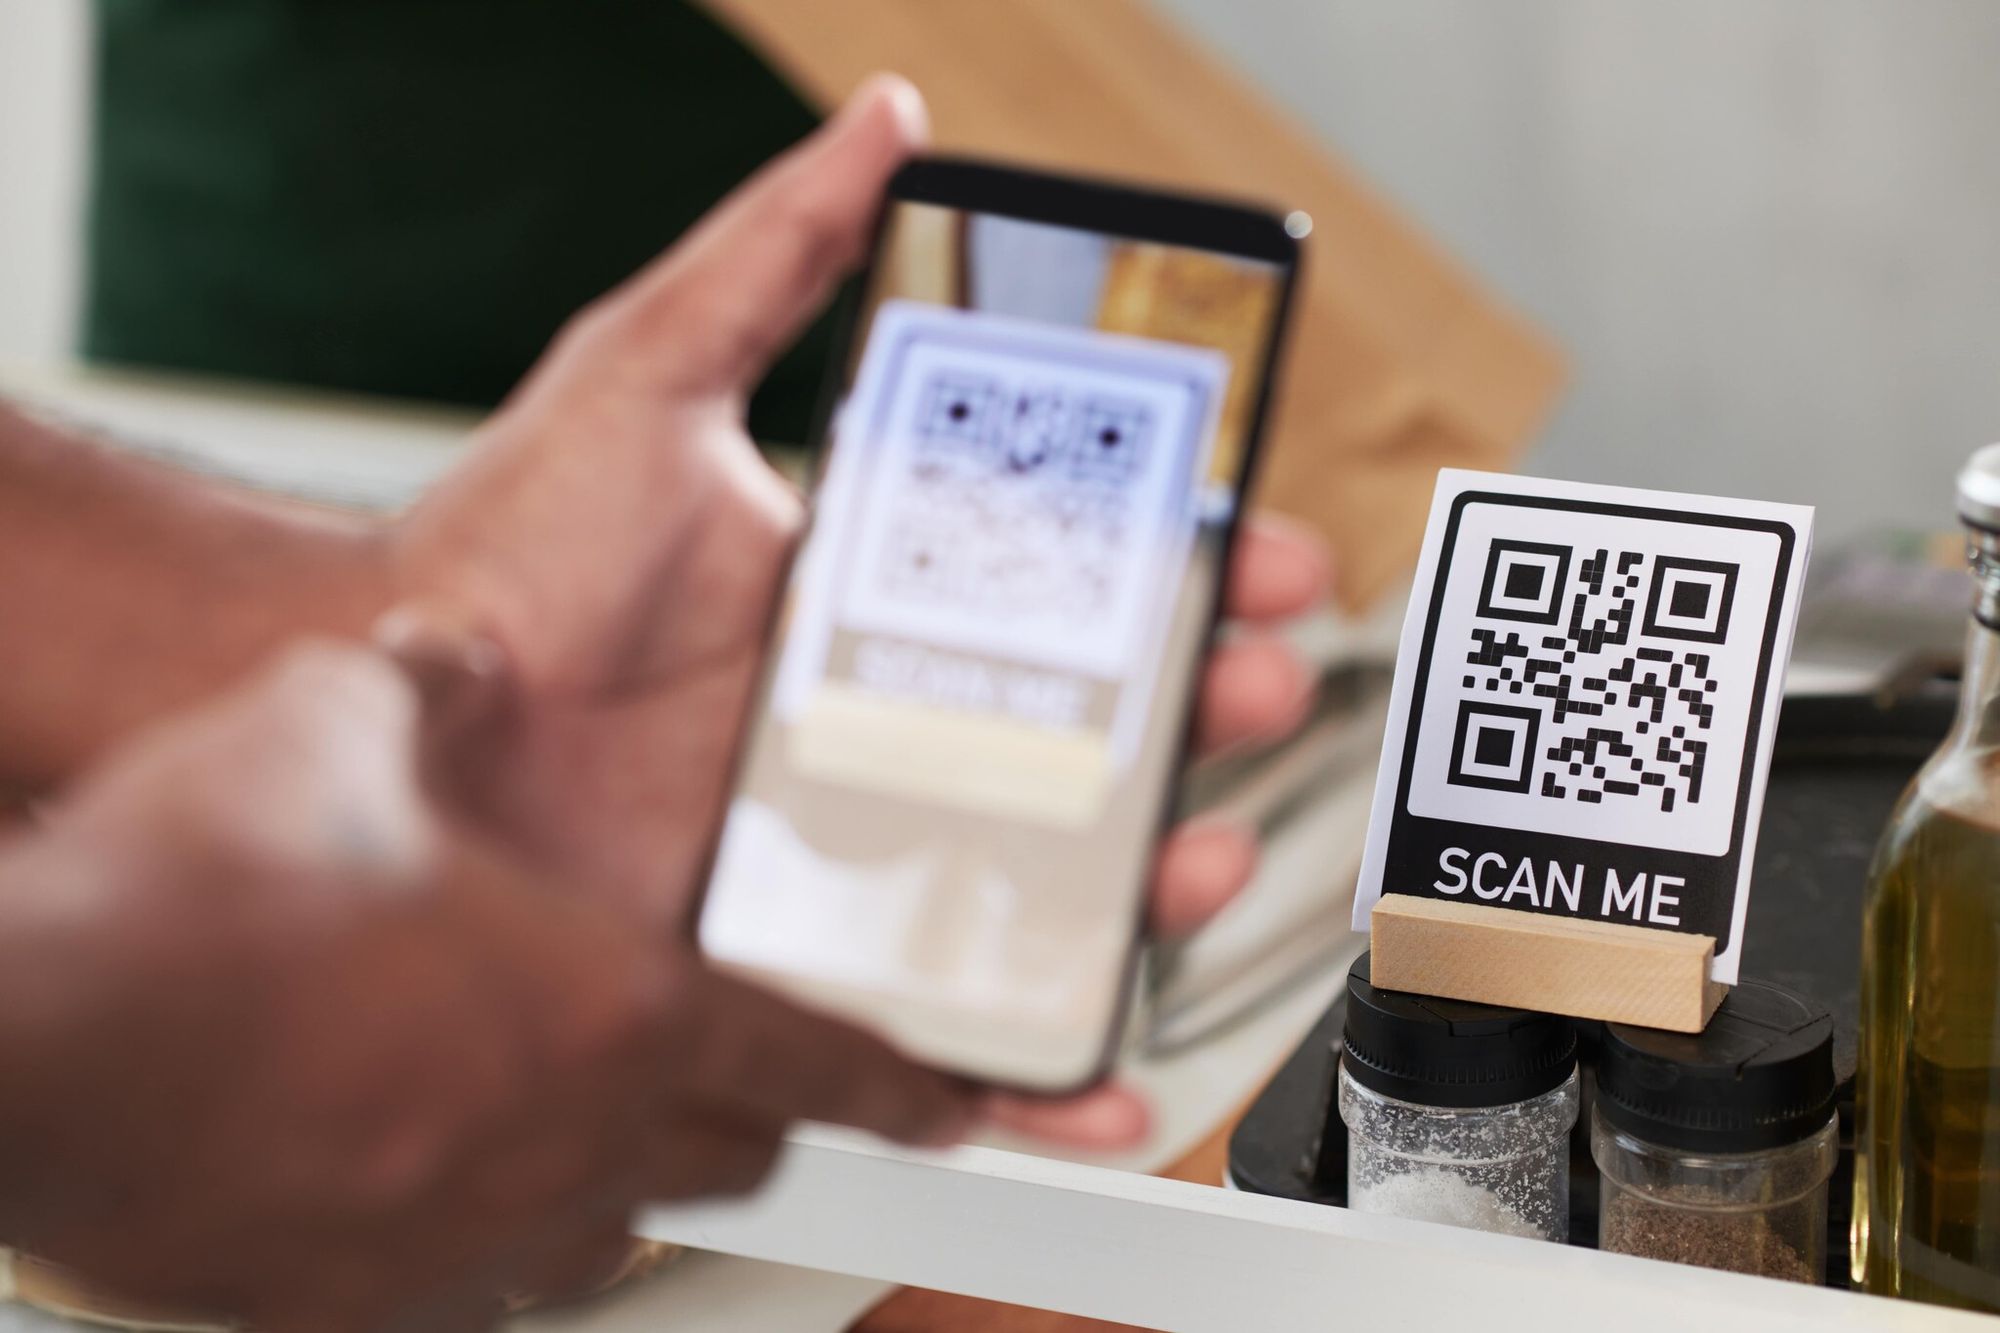 a hand scanning a QR code on the counter that says "Scan me"